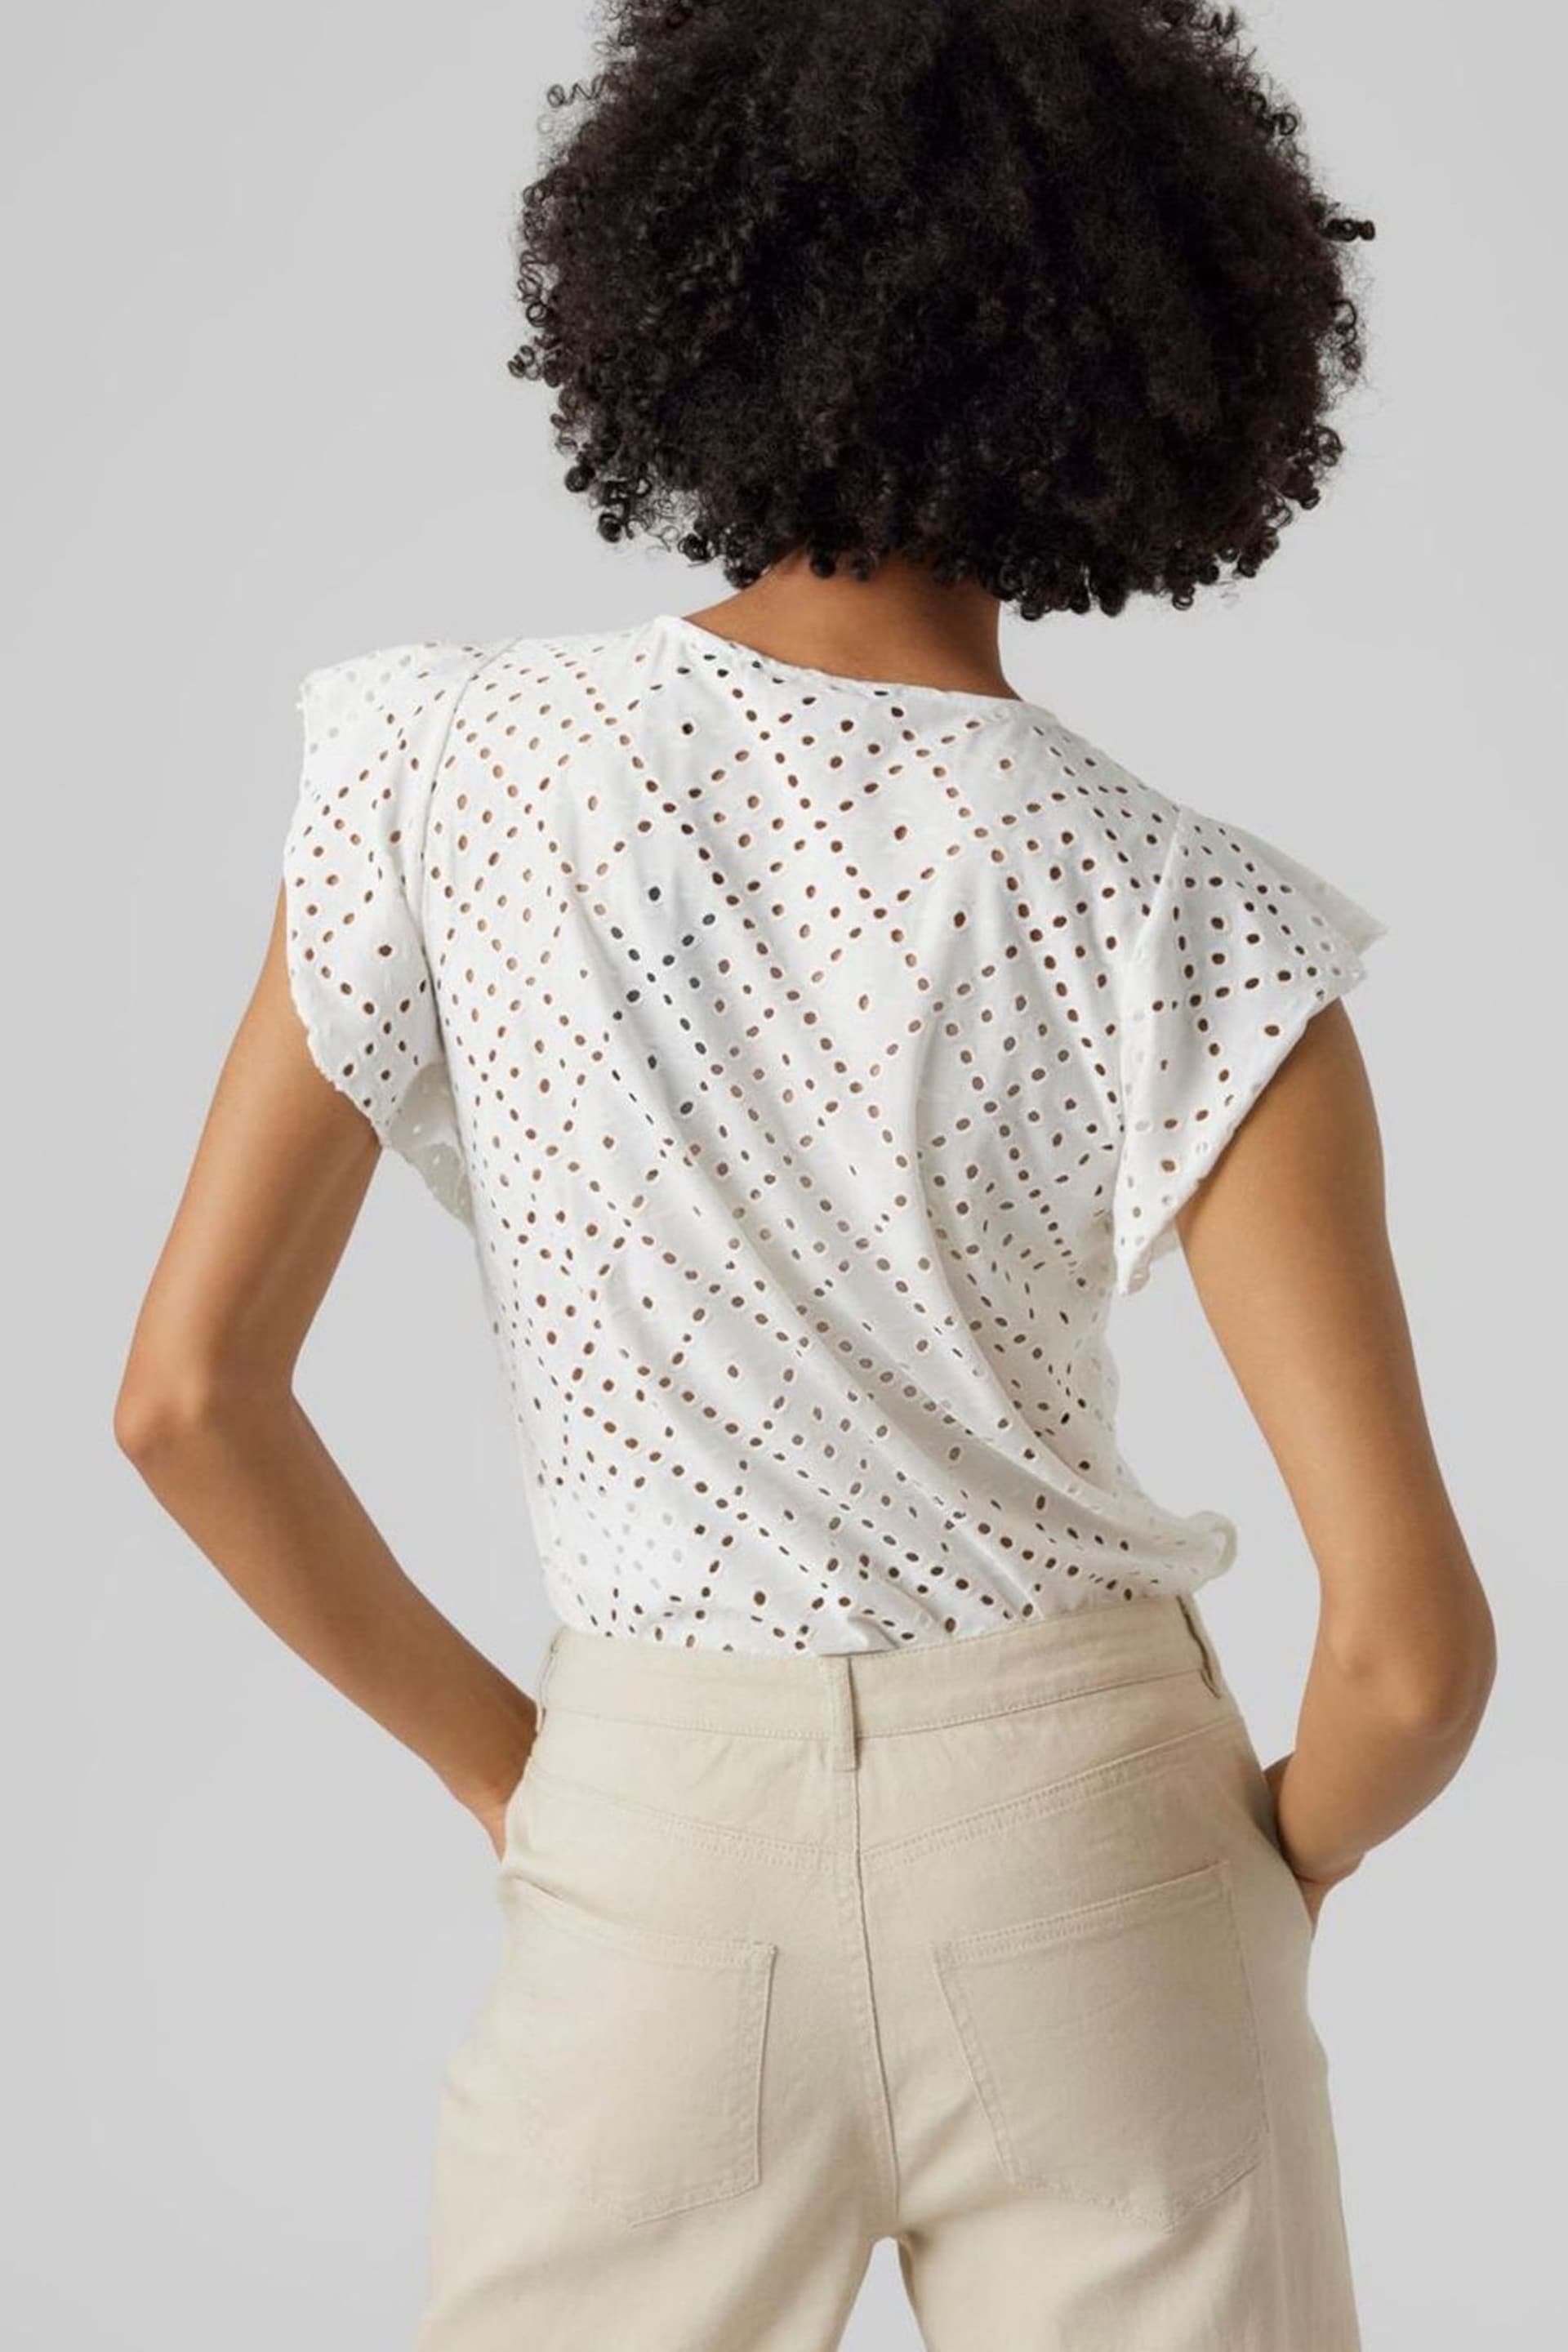 VERO MODA White Frilled Sleeve Broderie Top - Image 2 of 5